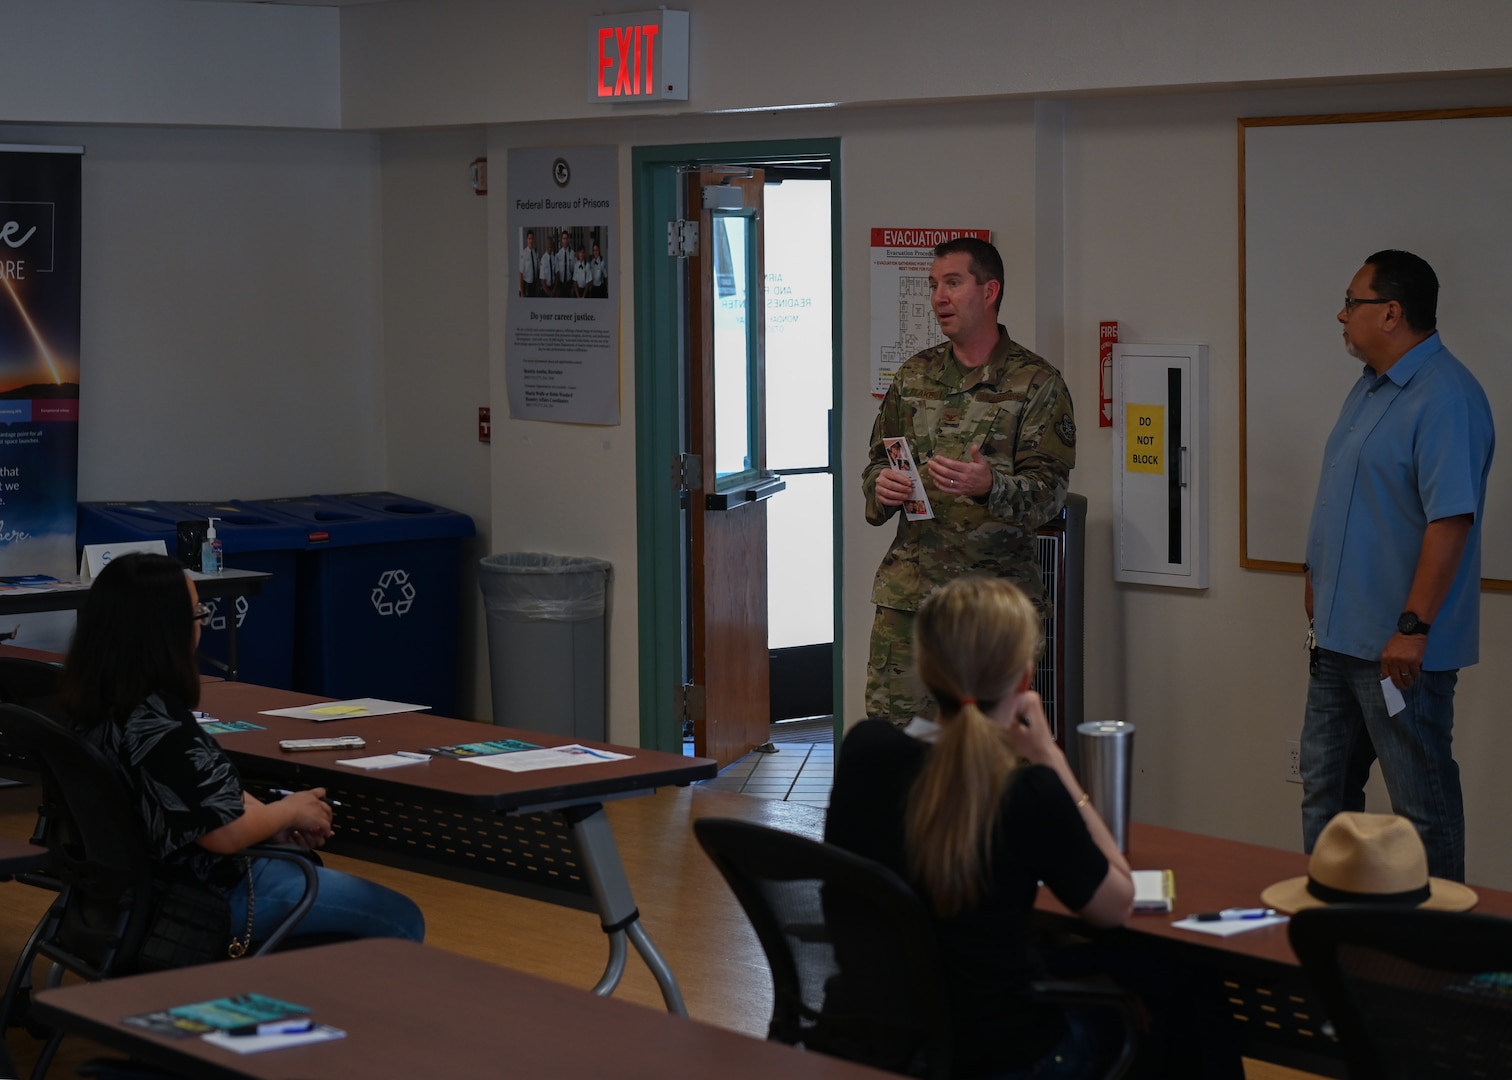 Col. Eric M. Flake, Joint Base Lewis-McChord medical director, greets and welcomes parents during the developmental pediatrics workshop at Vandenberg Space Force Base, Calif., May 25, 2022. Flake explained how the Air Force Developmental Behavioral Family Readiness Center collaborates with families that have children with special needs to provide assistance with programs that cater to their specific developmental and behavioral needs. (U.S. Space Force photo by Airman 1st Class Tiarra Sibley)